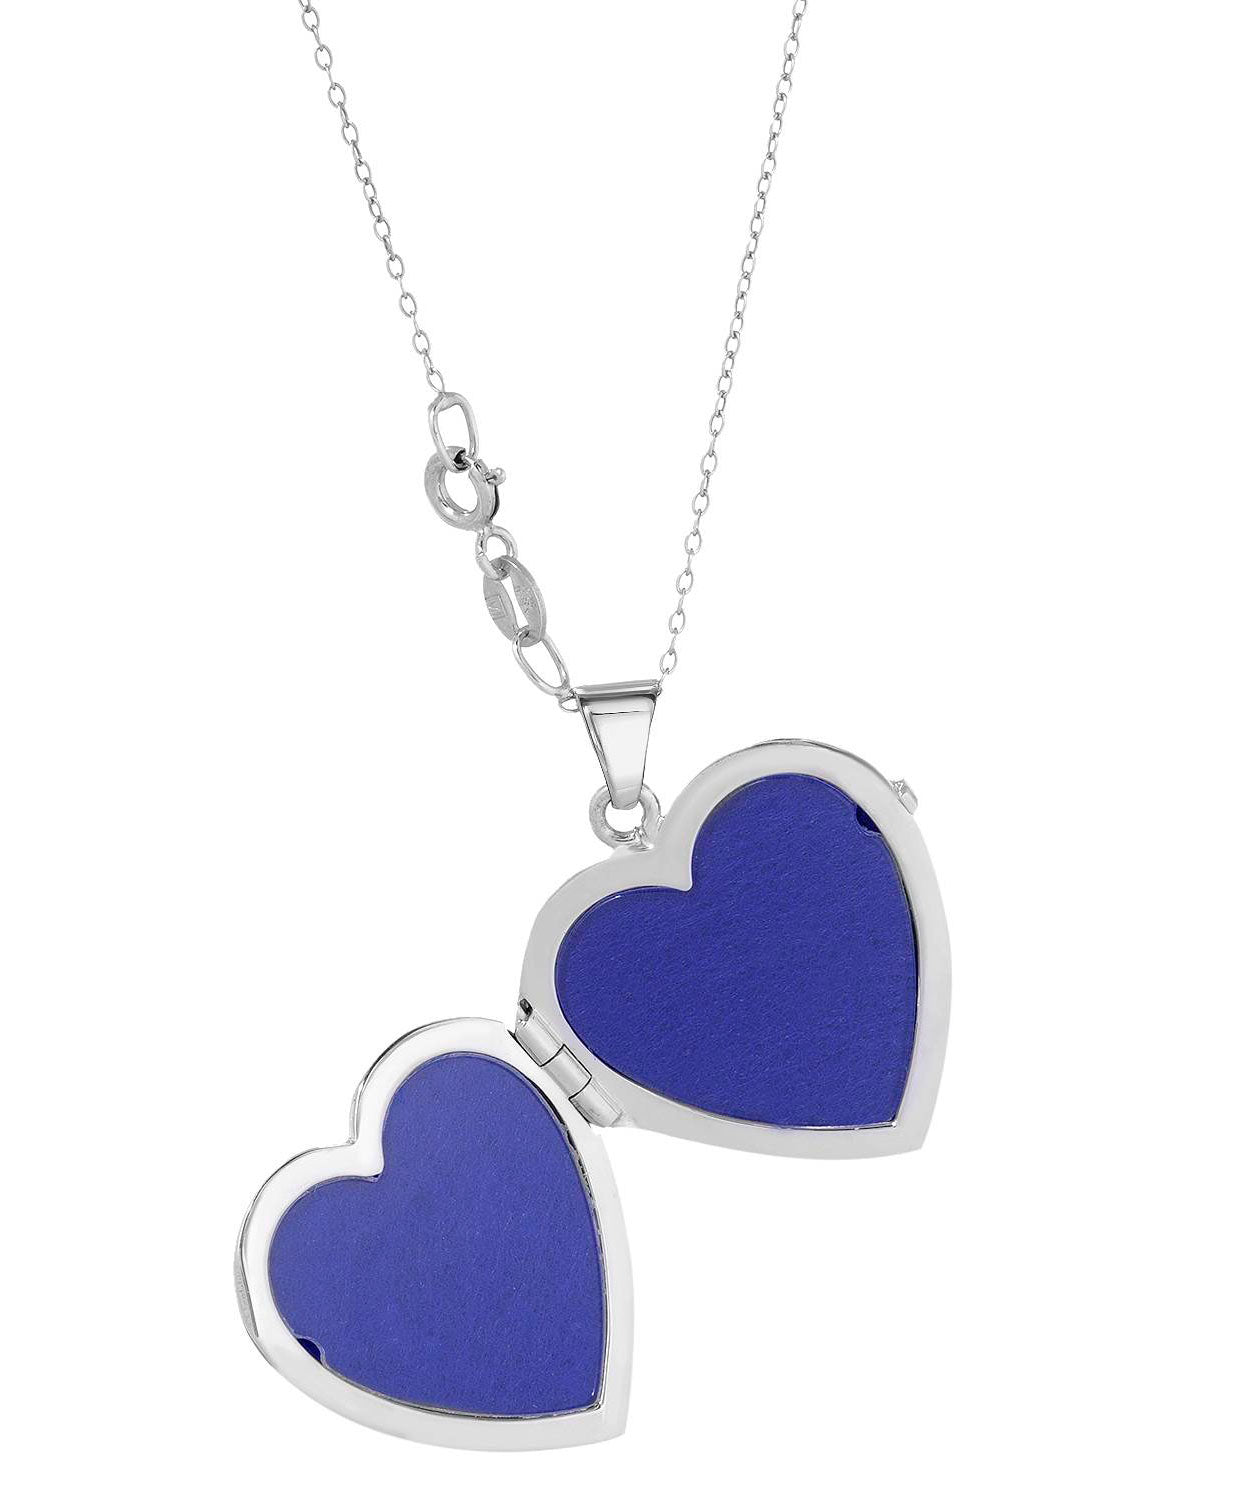 Patterns of Love Collection Rhodium Plated 925 Sterling Silver Heart Locket Pendant With Chain - Made in Italy View 2